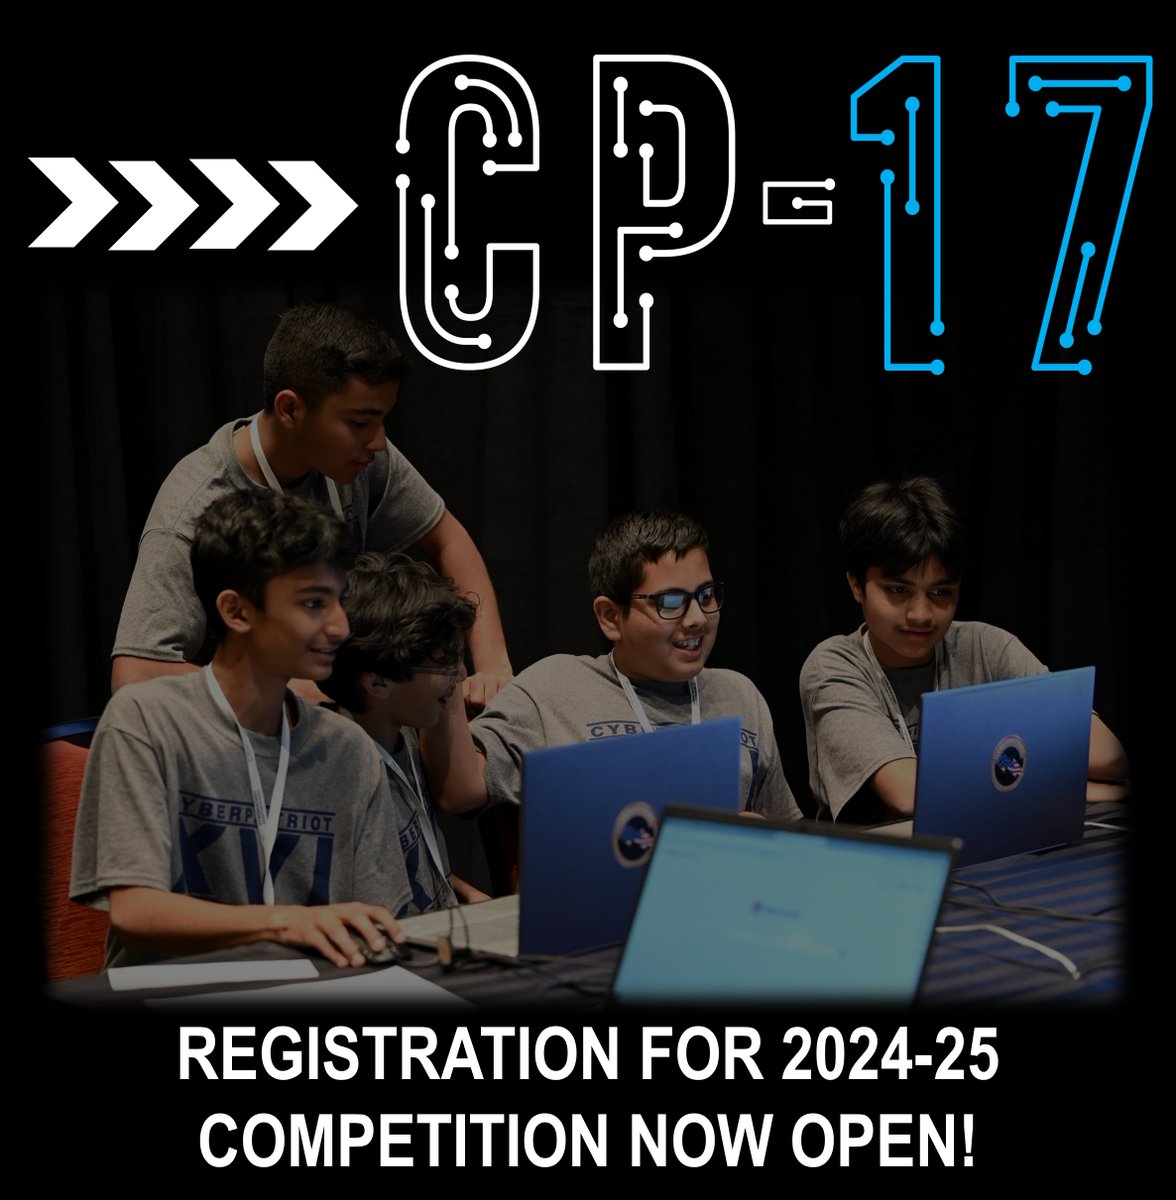 Here we go! Registration for CyberPatriot 17 is now open. Visit uscyberpatriot.org/competition/Co… to register a team.